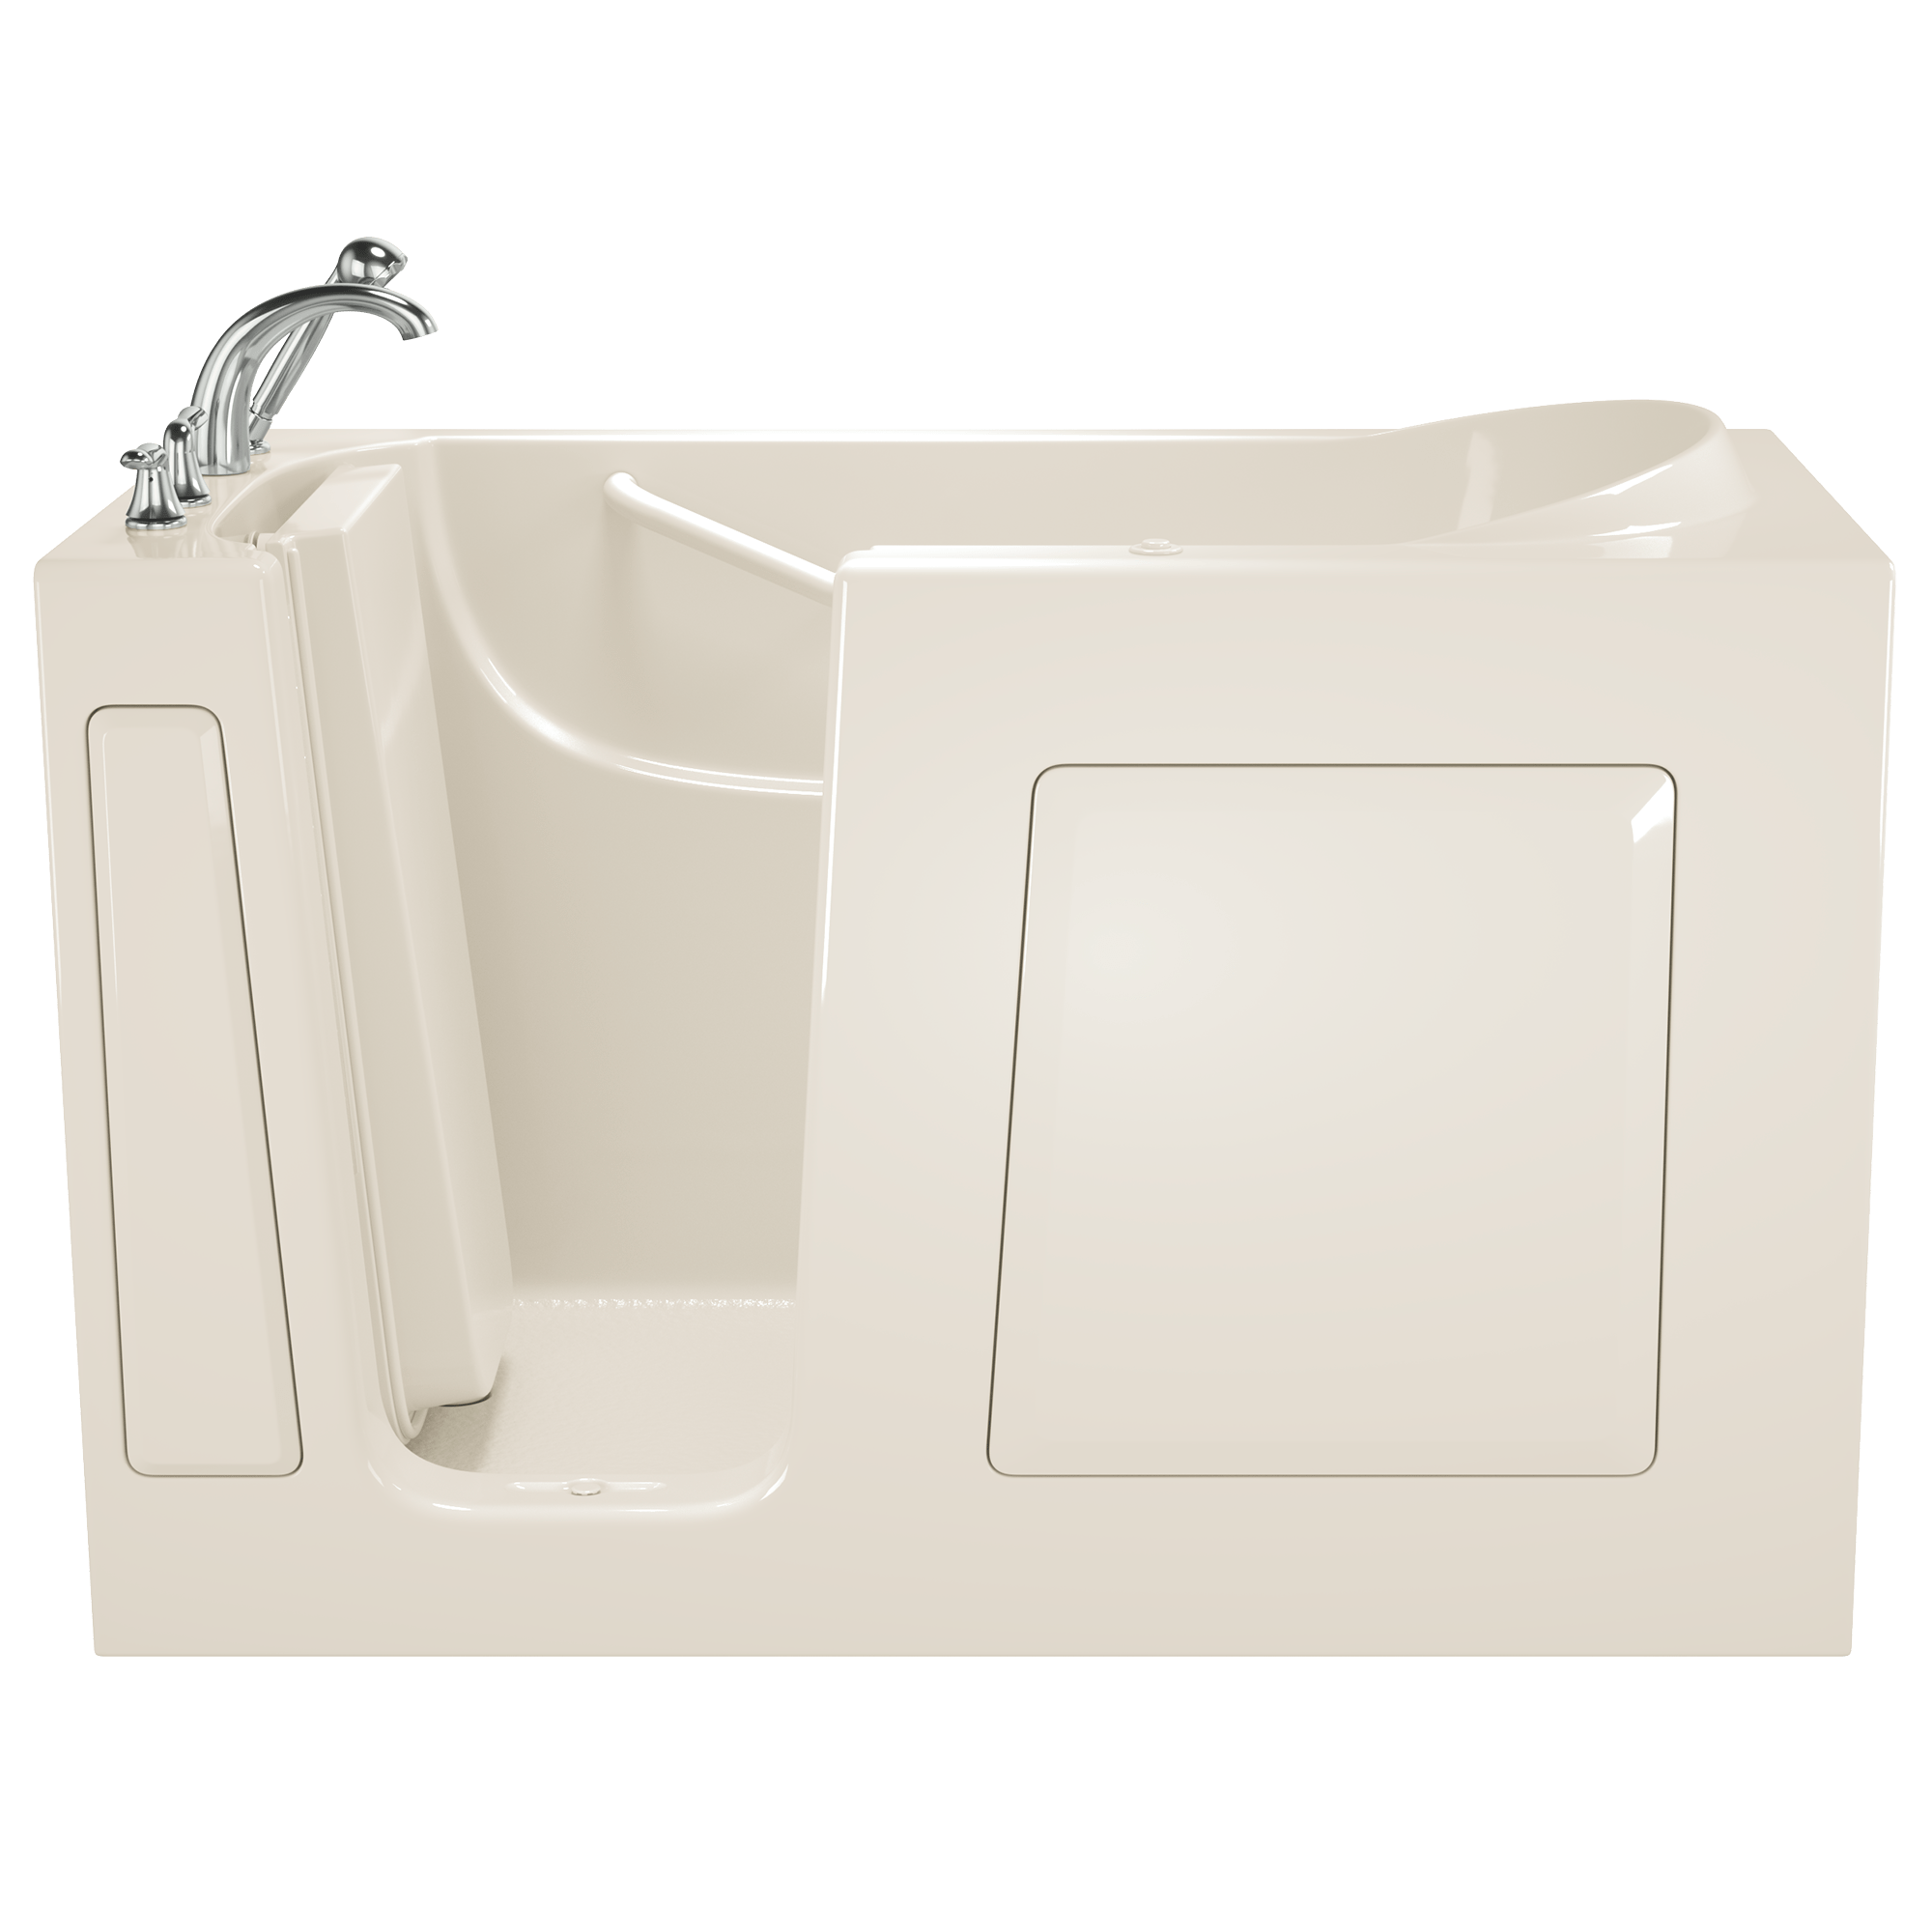 Gelcoat Entry Series 60 x 30-Inch Walk-In Tub With Air Spa System – Left-Hand Drain With Faucet